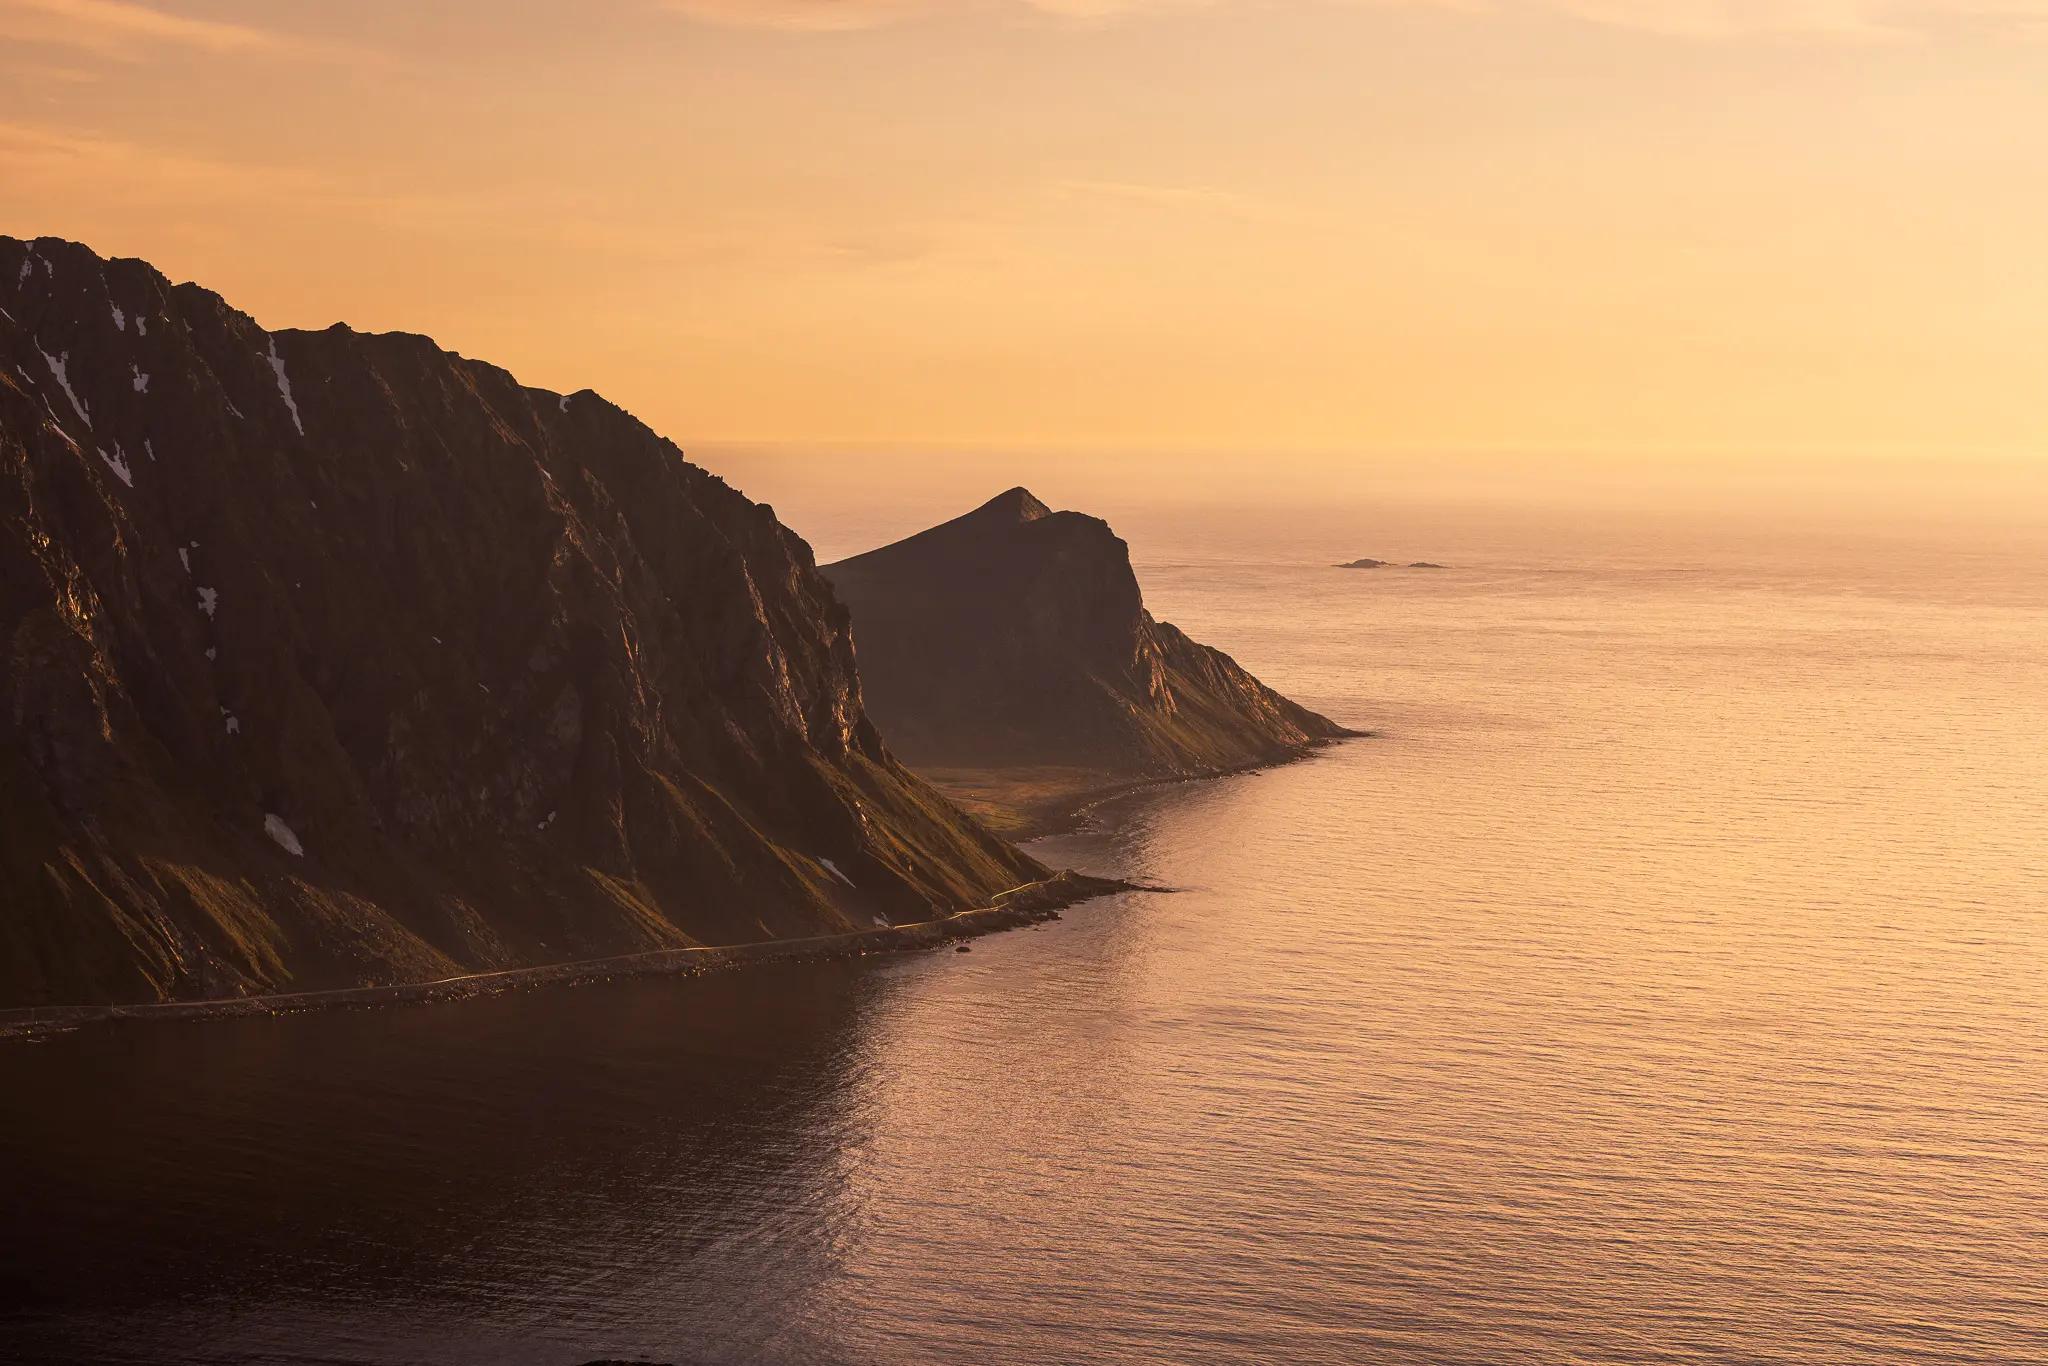 Golden light in abundance: the midnight sun in Lofoten bathes the stunning landscape in a soft, warm light for hours on end